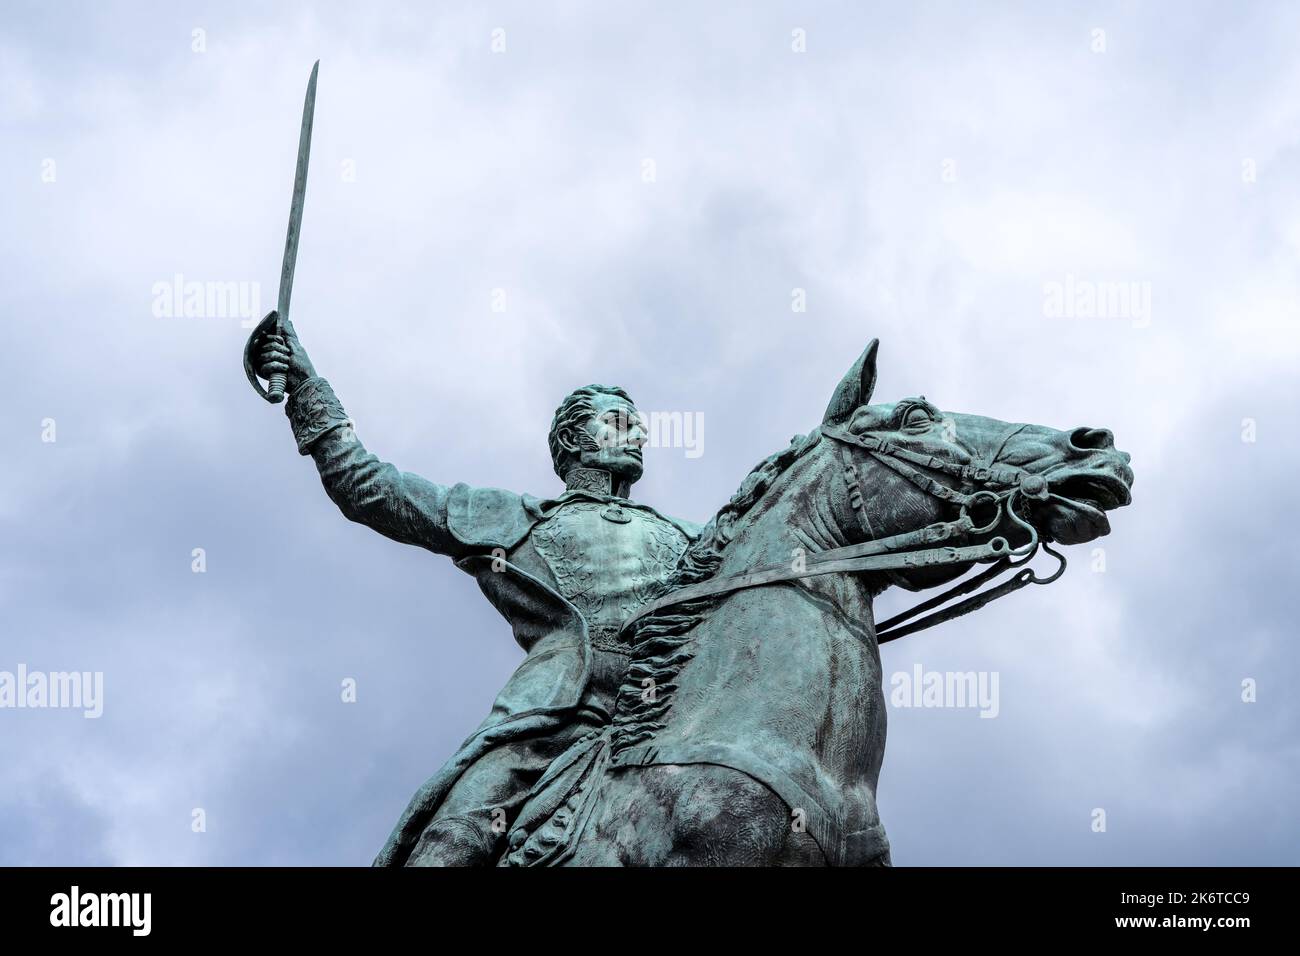 Washington, DC - Sept. 8, 2022: Close up of the equestrian statue of Simon Bolivar the Liberator, the Venezuelan military and political leader, by Fel Stock Photo